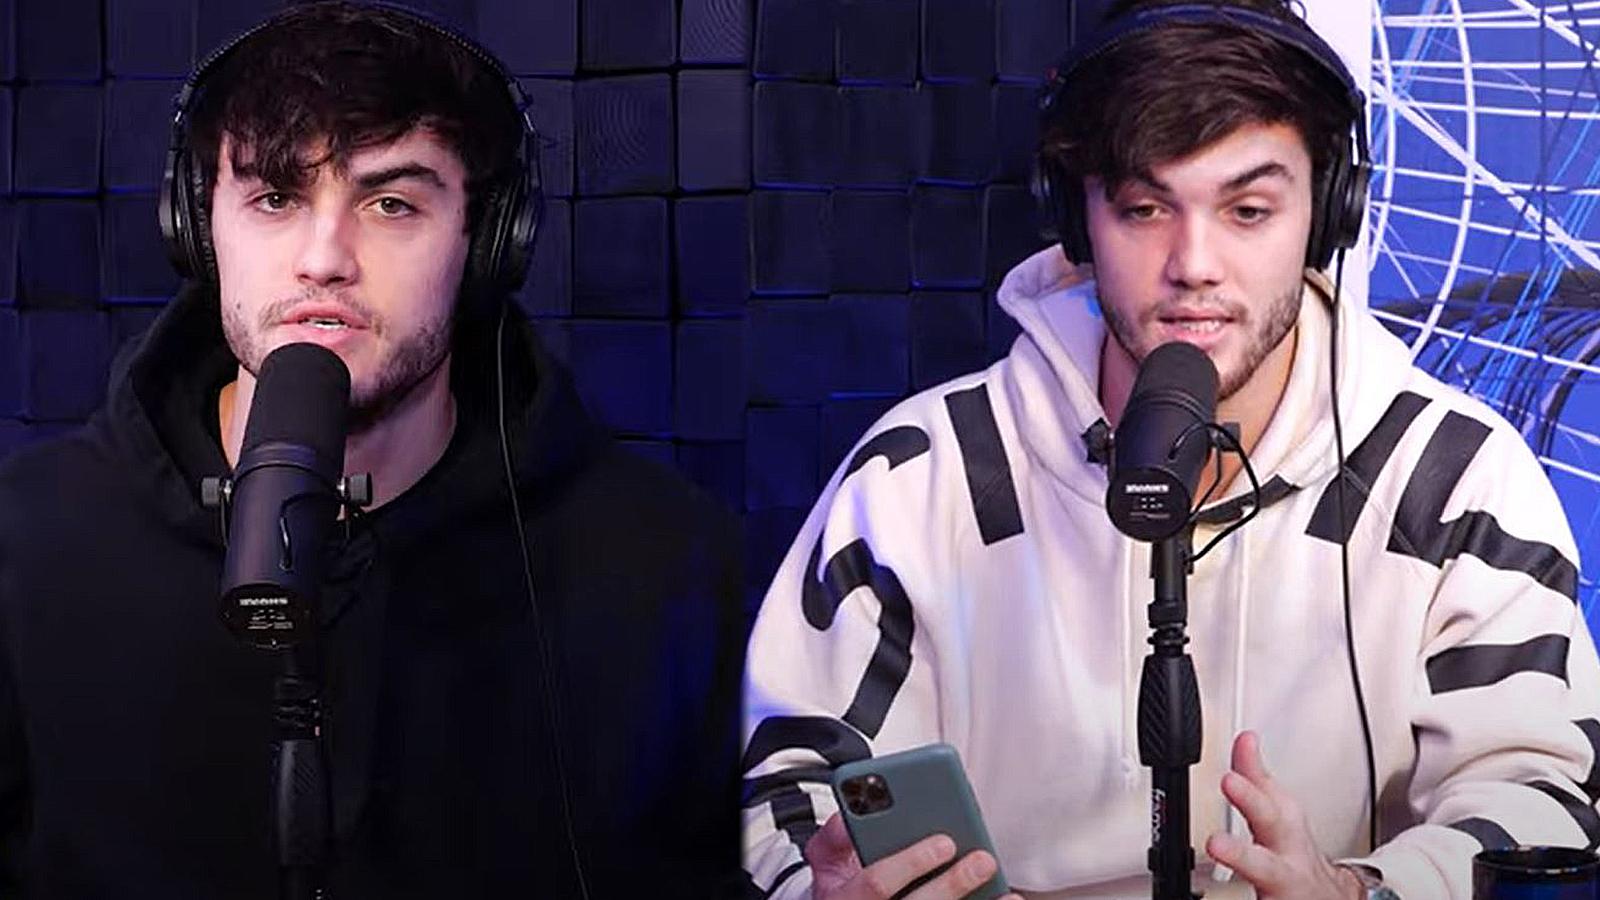 The Dolan Twins announce they are quitting YouTube